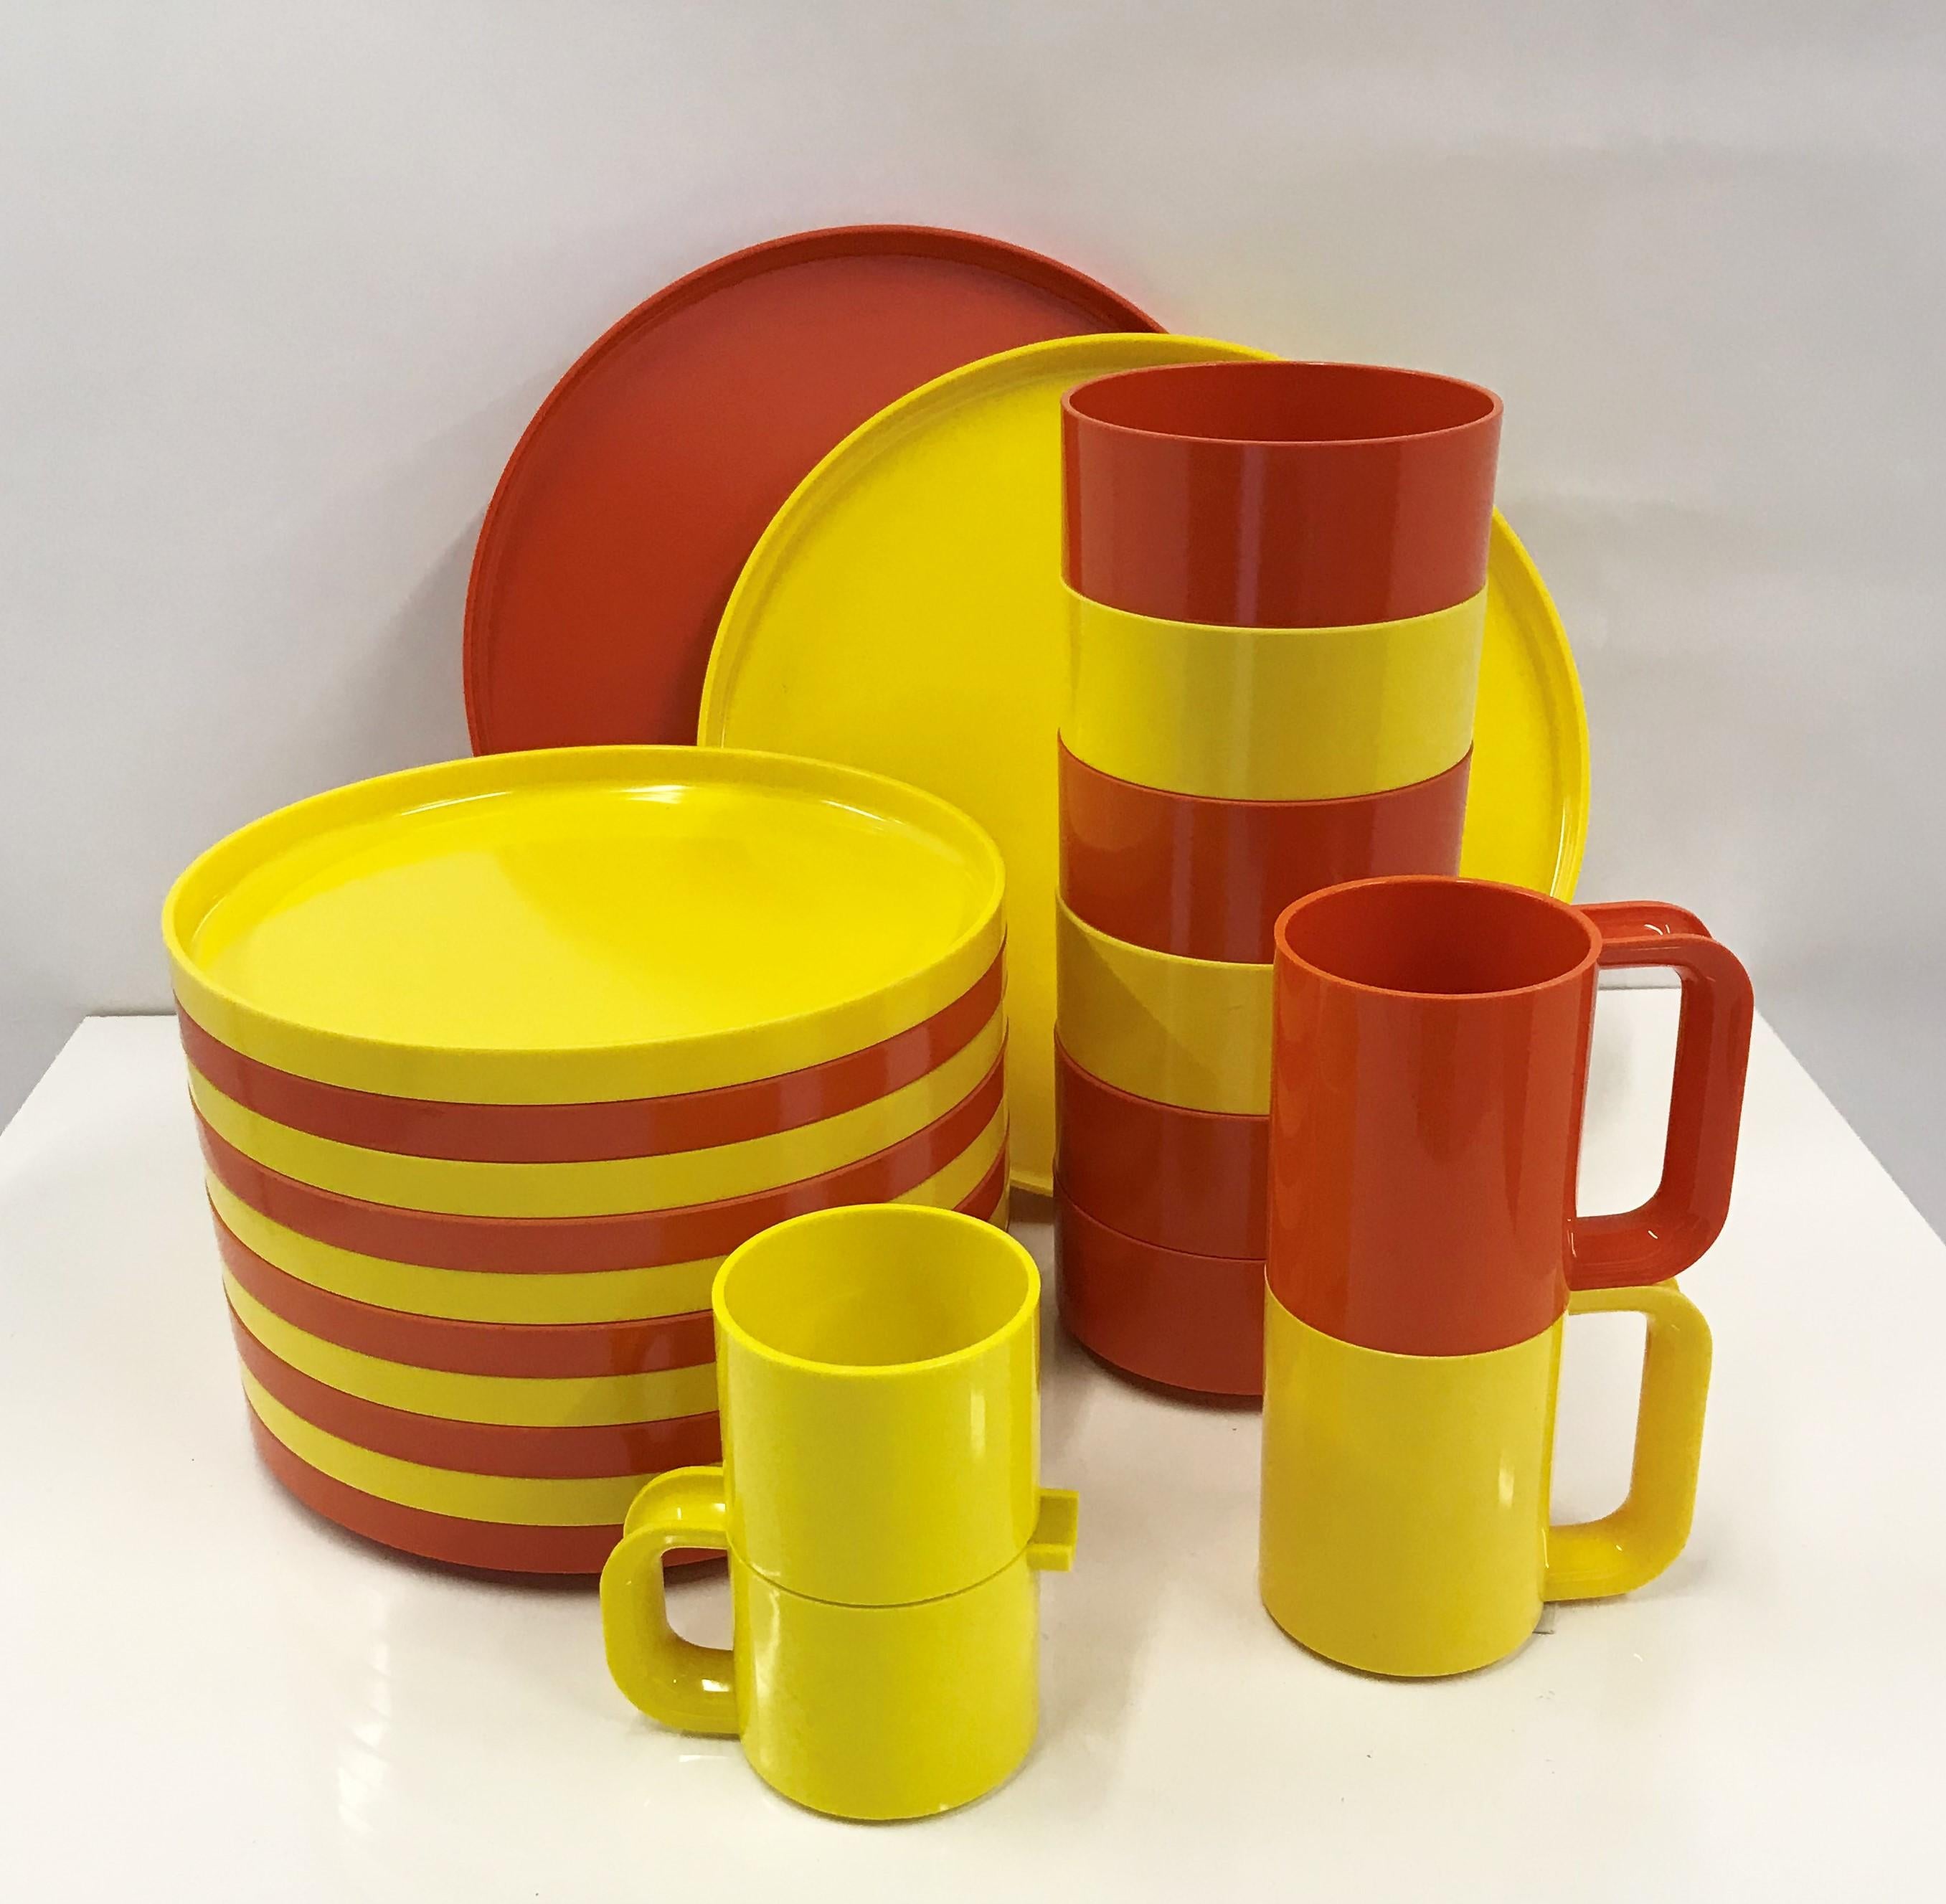 Massimo Vignelli for Heller Set of Max 2 ABS Dinnerware, Italy 1960s - 22 Pieces 4